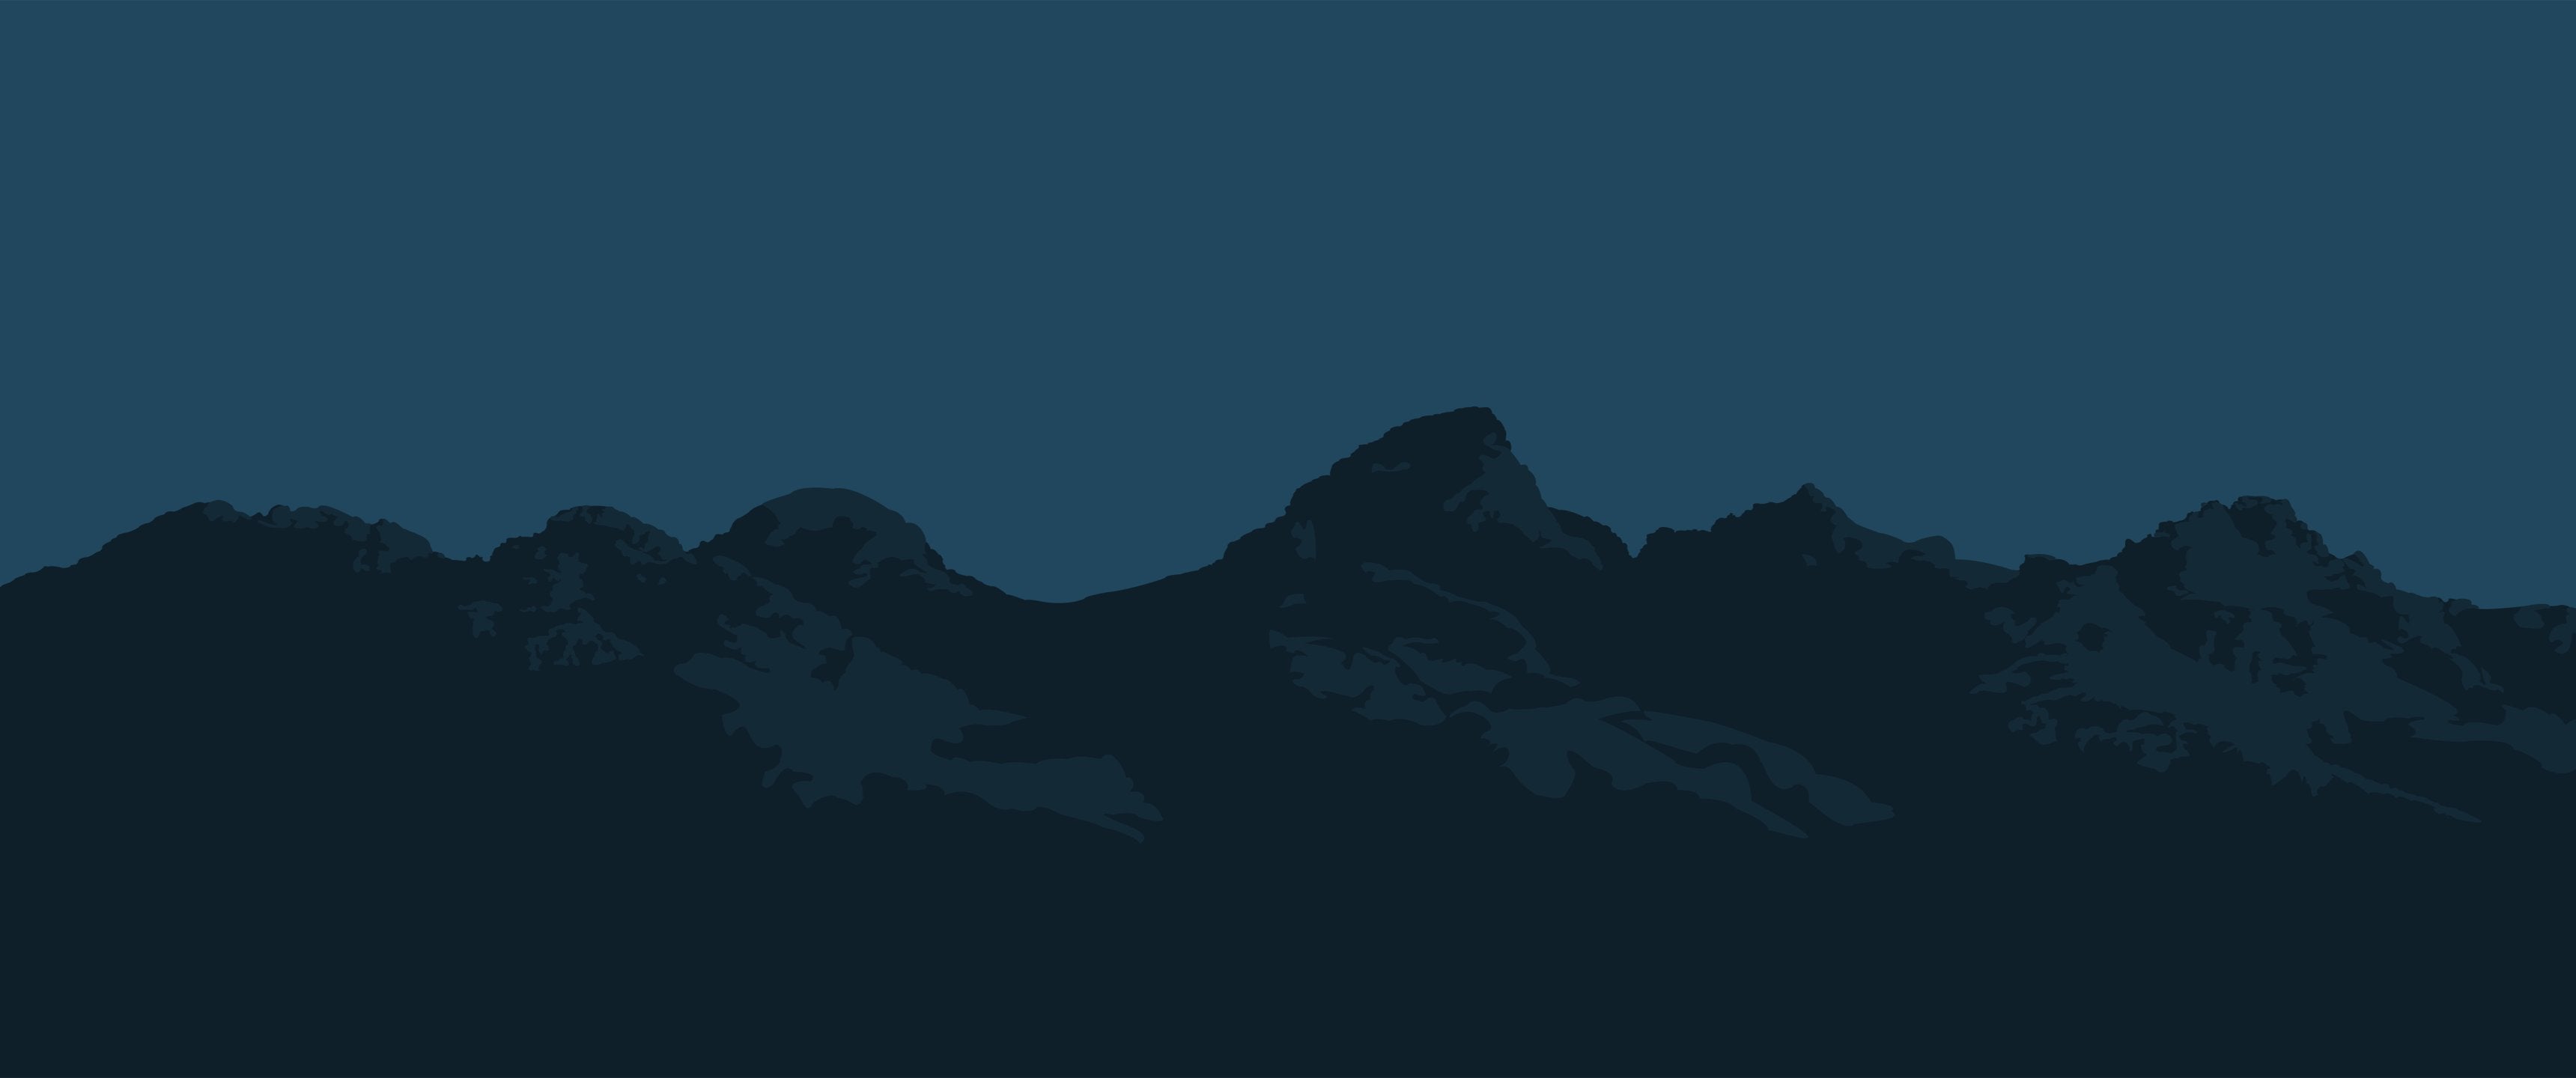 50 Minimalist Desktop Wallpapers and Backgrounds (2022 Edition